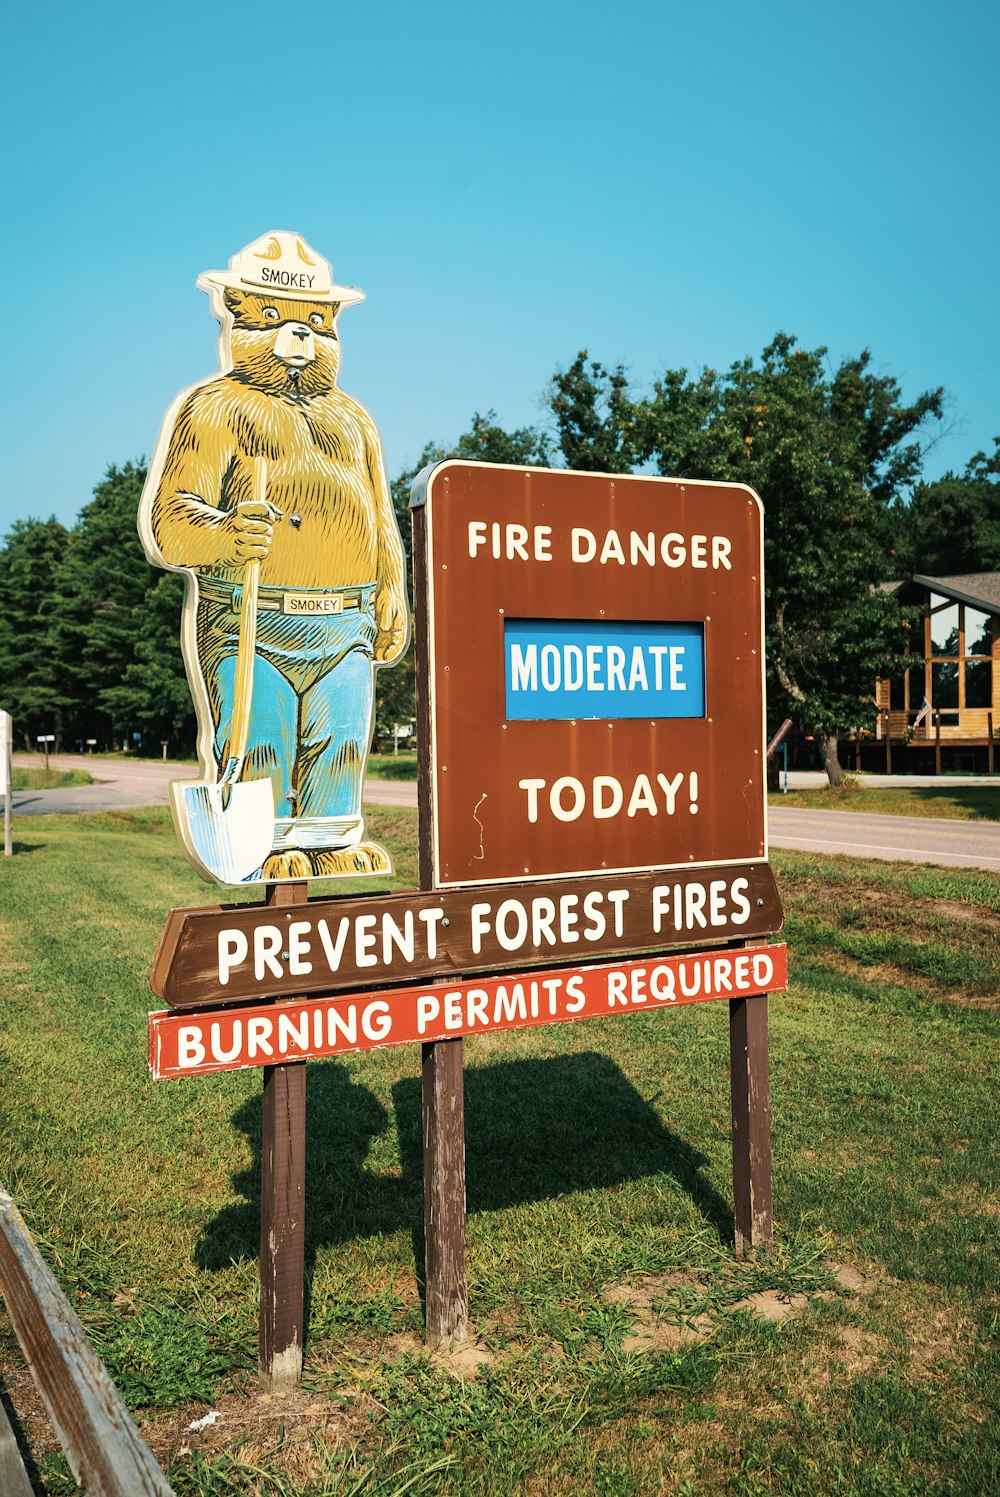 fire danger moderate today signage